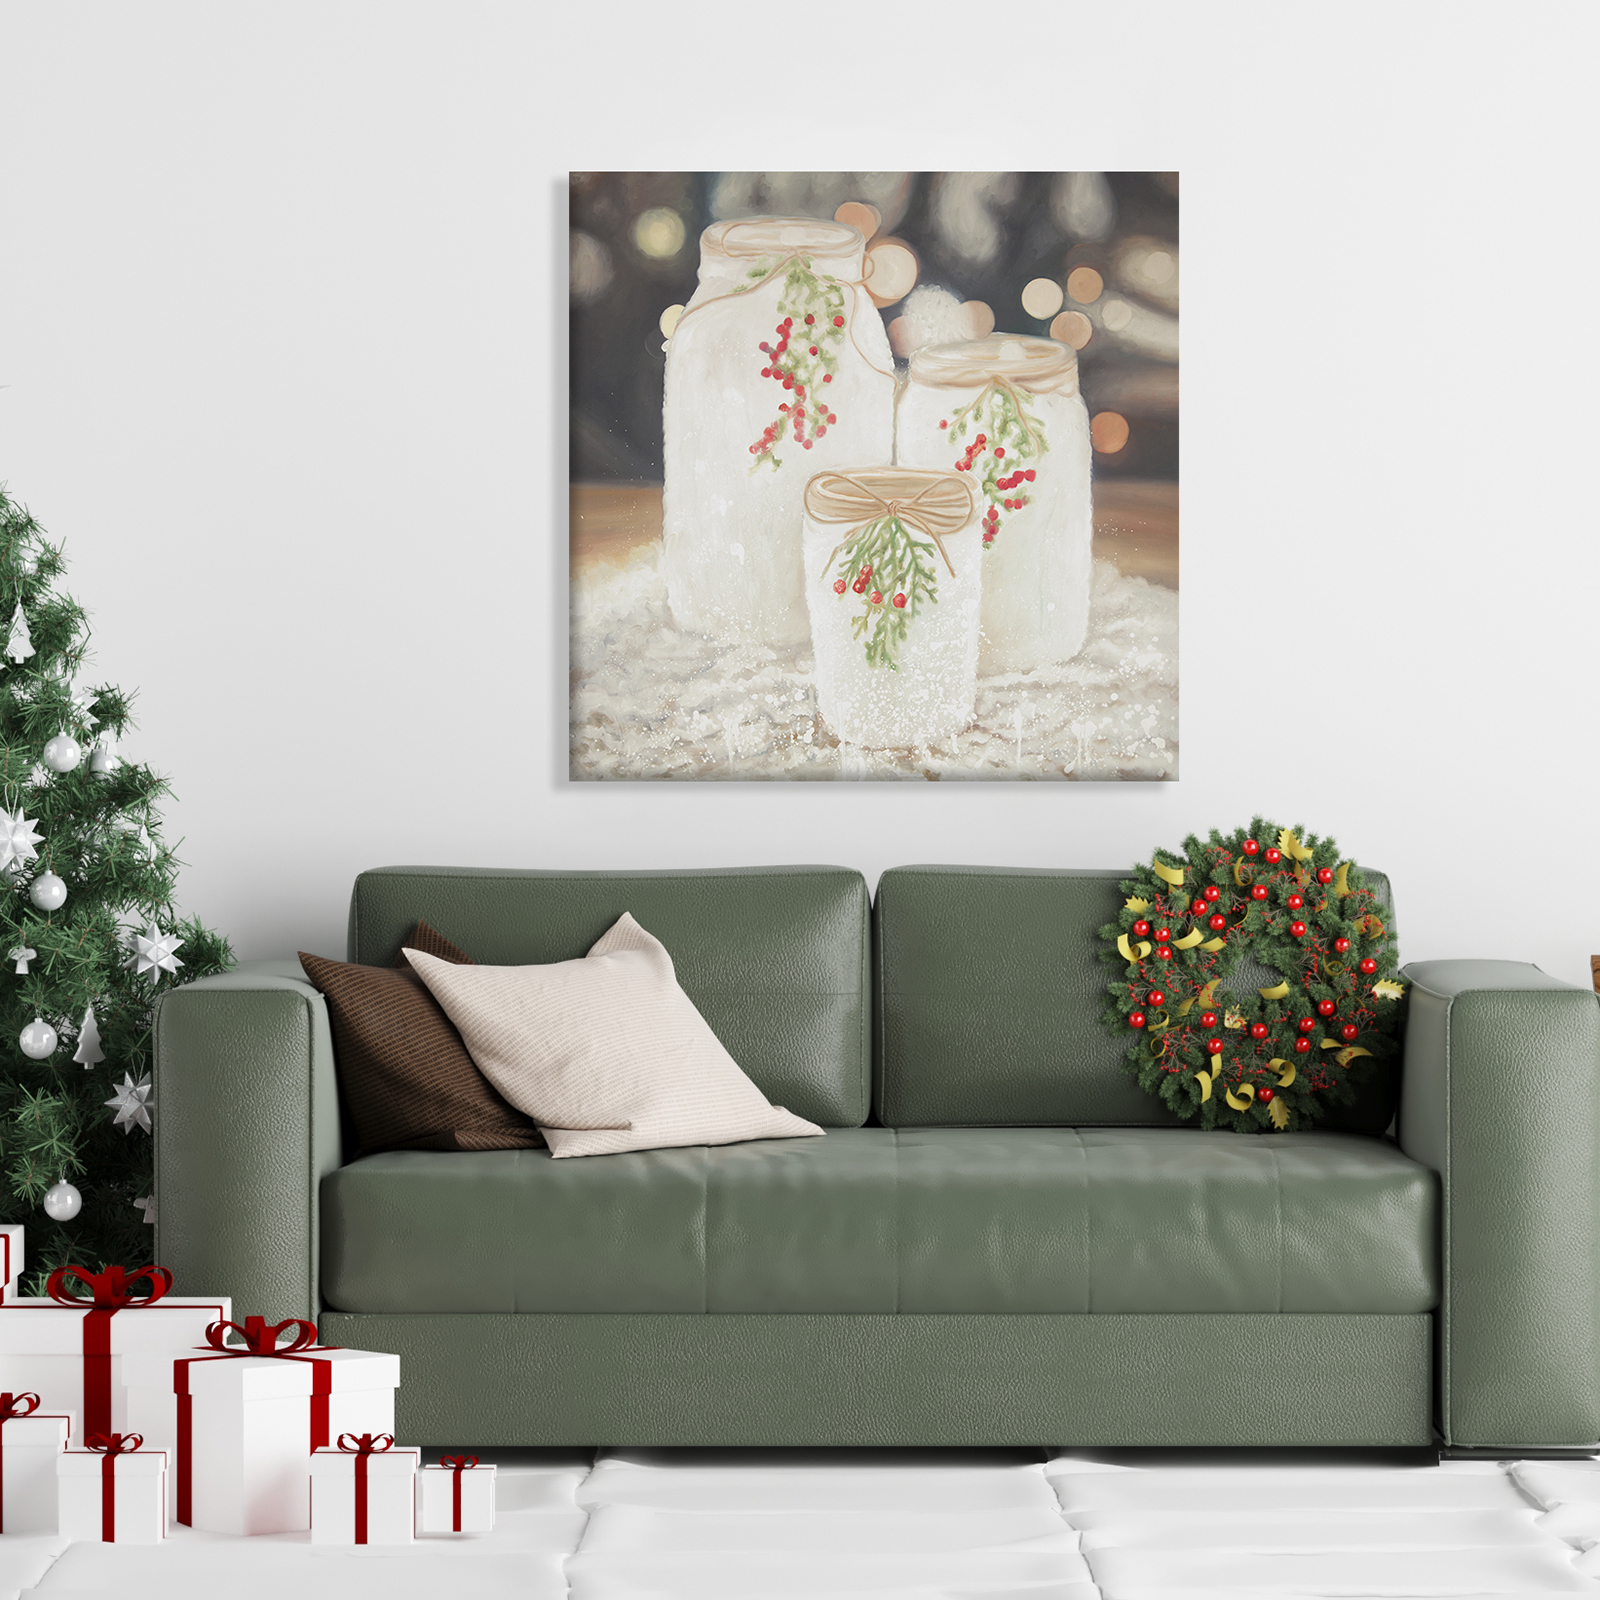 Canvas 24 x 24 - Christmas candles